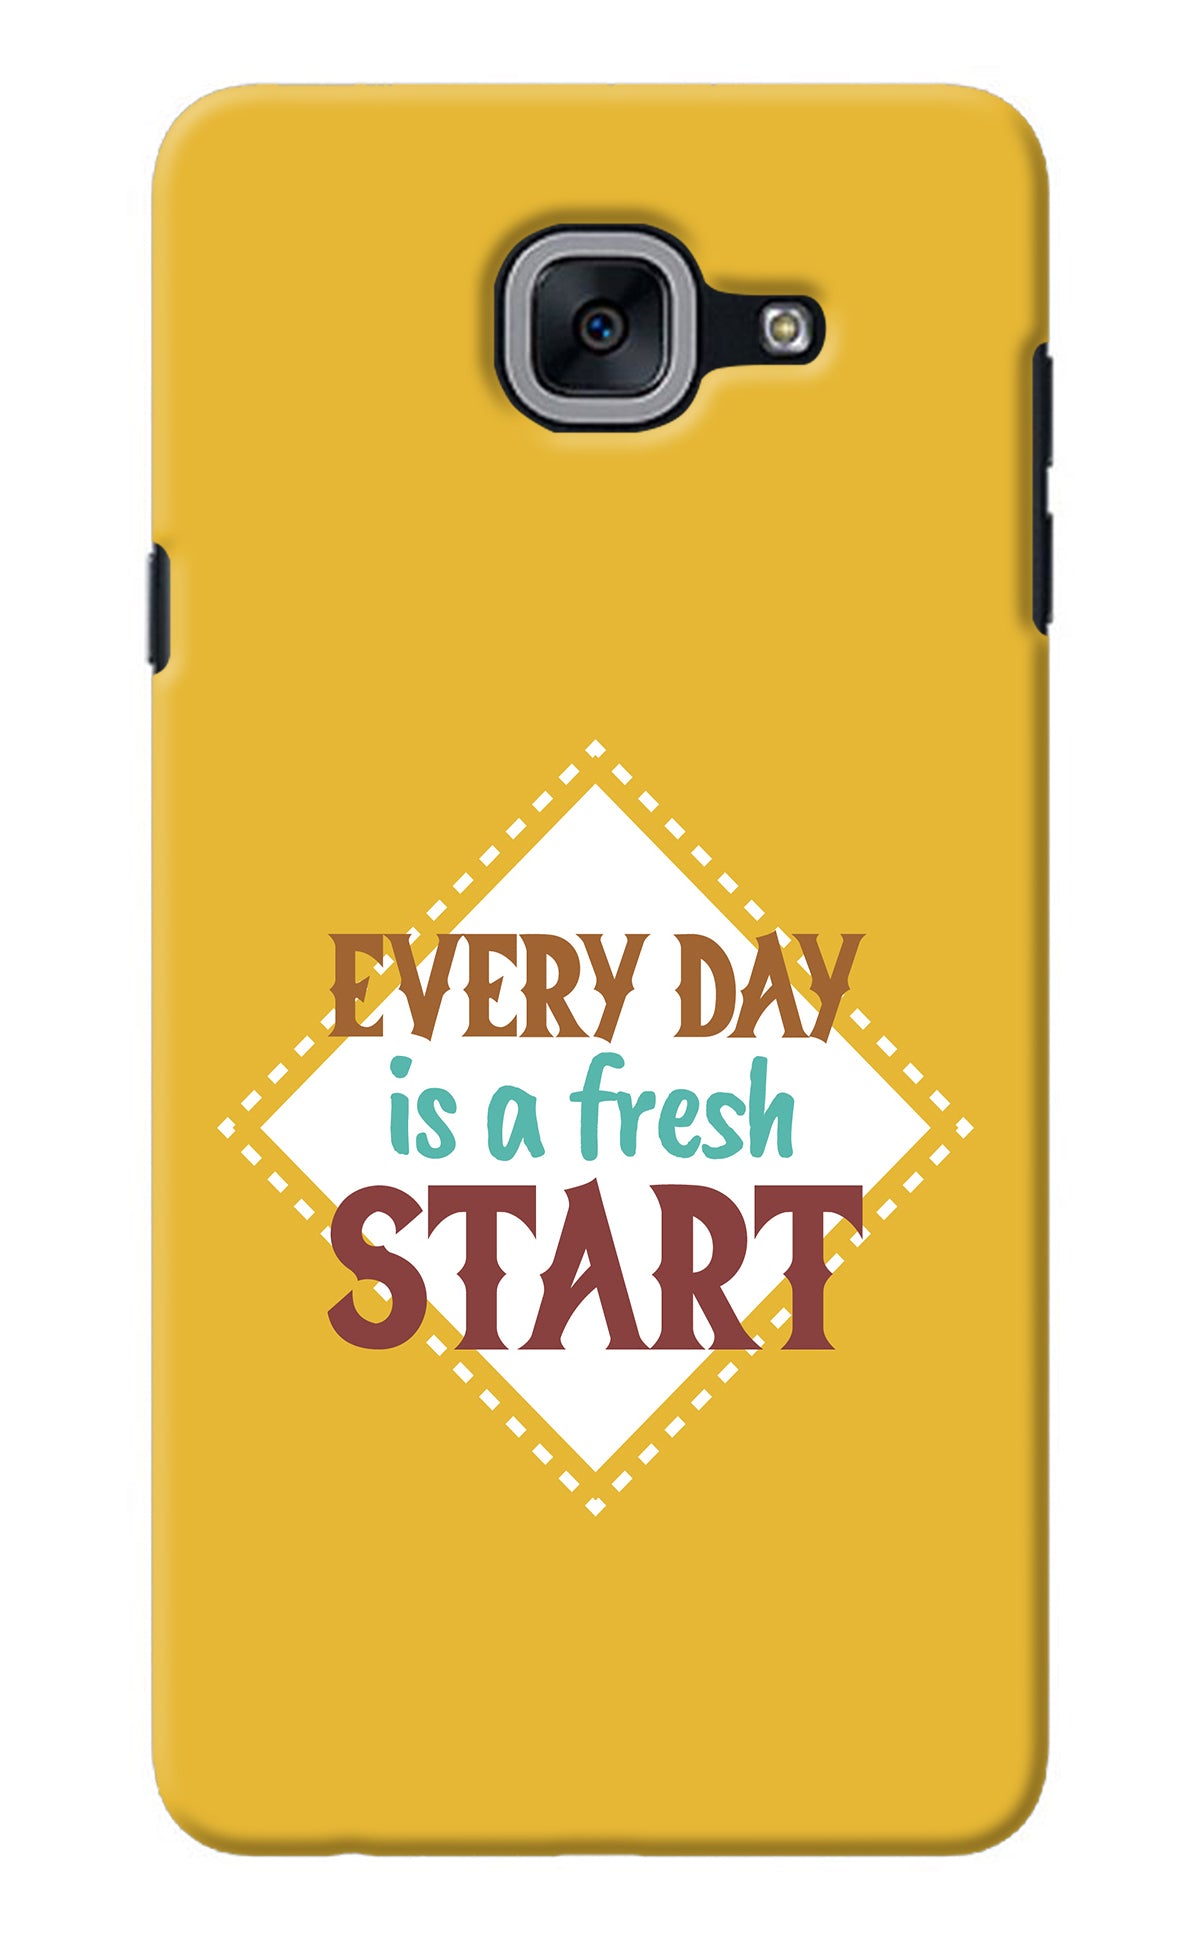 Every day is a Fresh Start Samsung J7 Max Back Cover